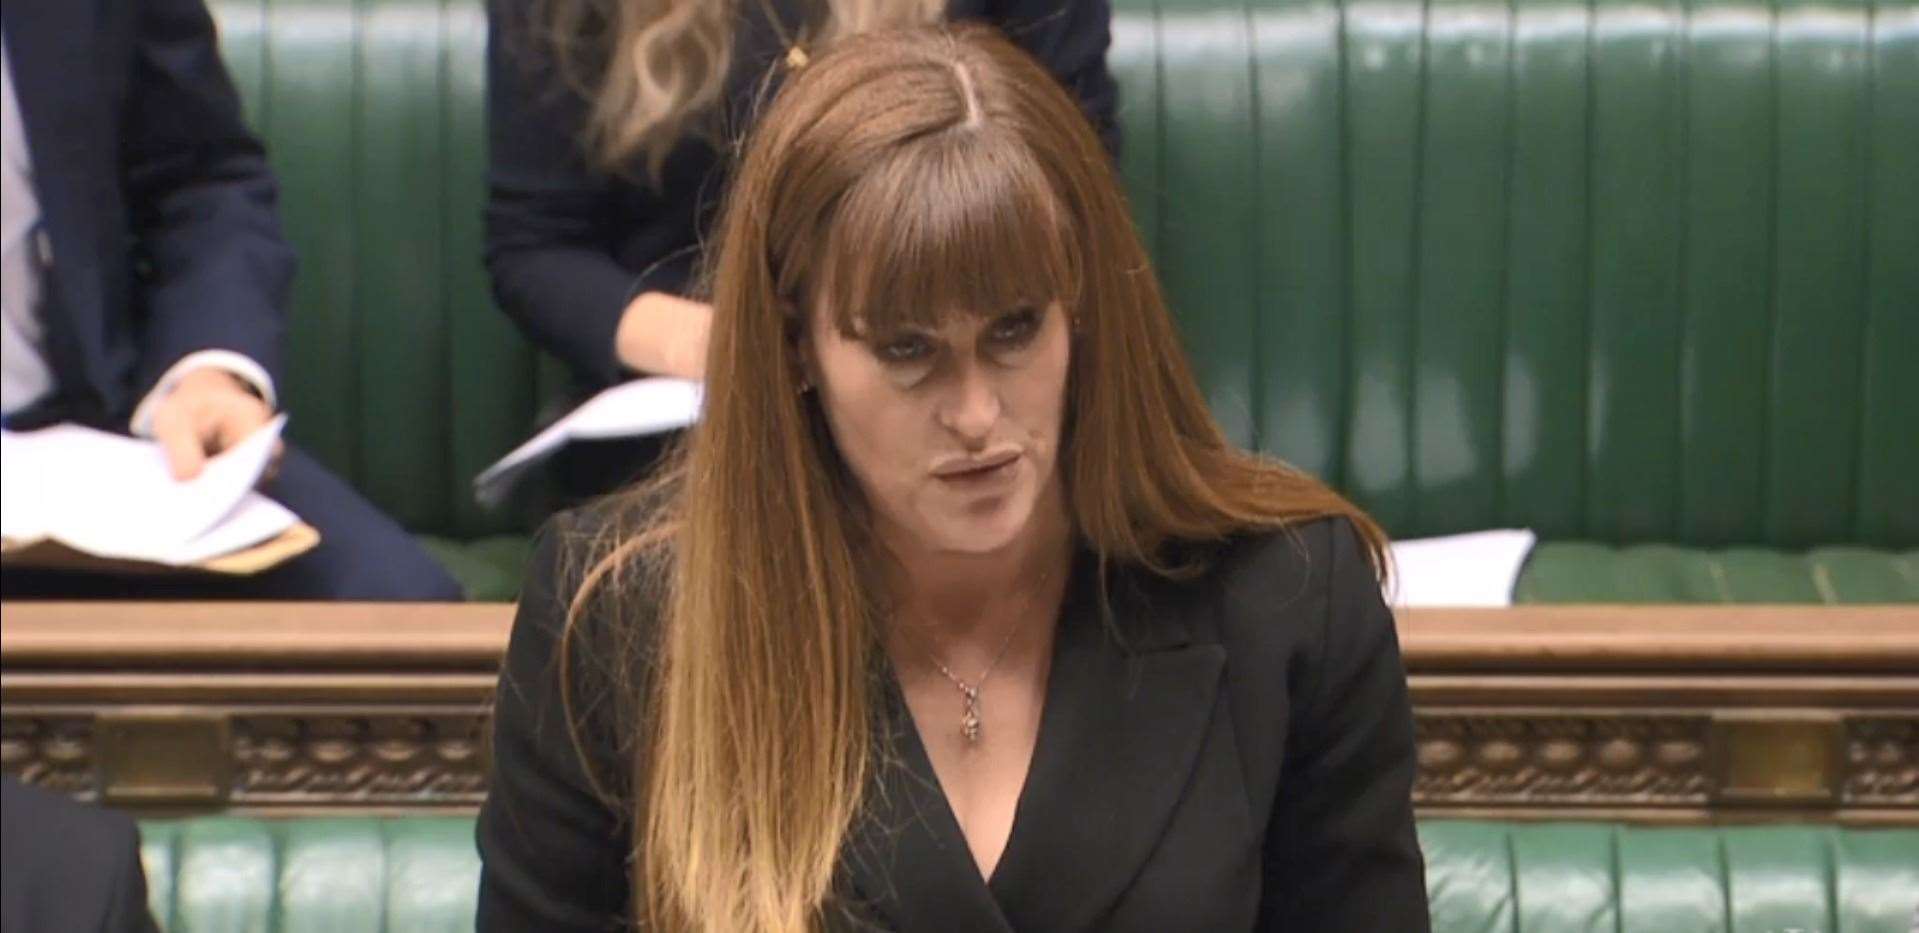 Kelly Tolhurst described the plan as 'flawed'. Picture: ParliamentTV